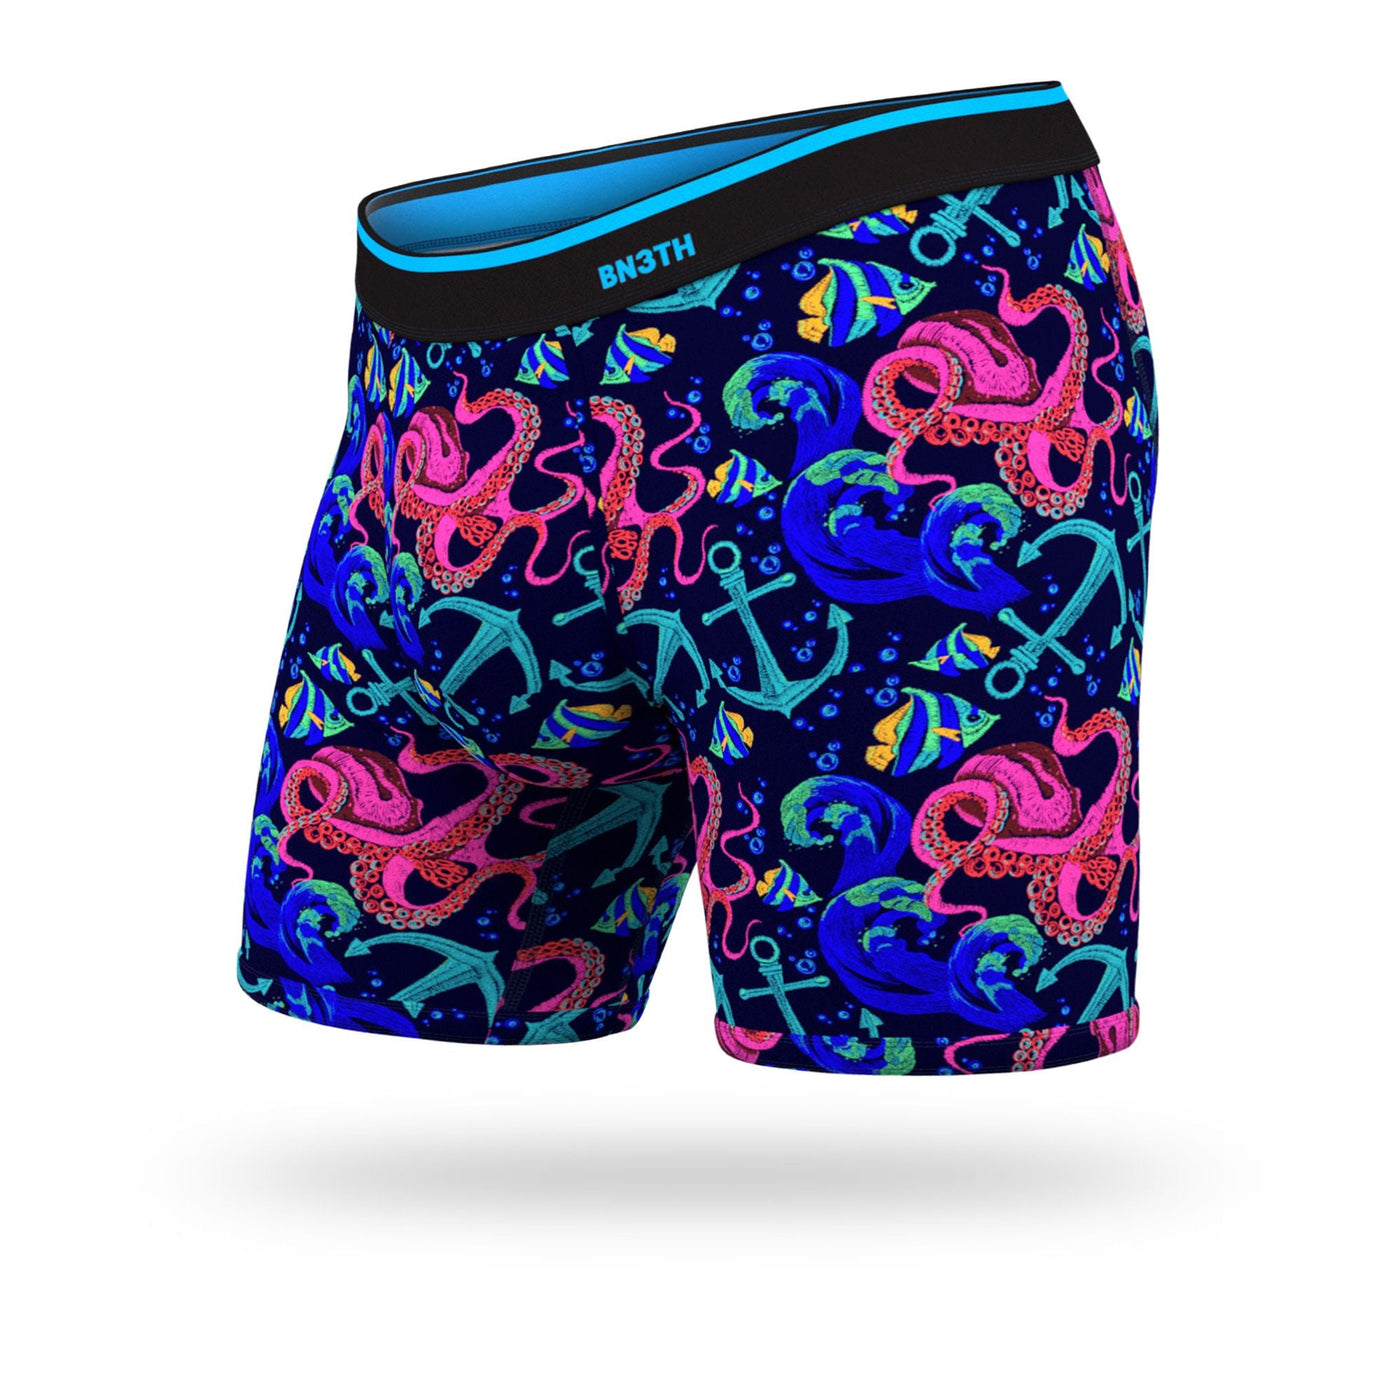 Classic Boxer Brief - Under the Sea - Navy